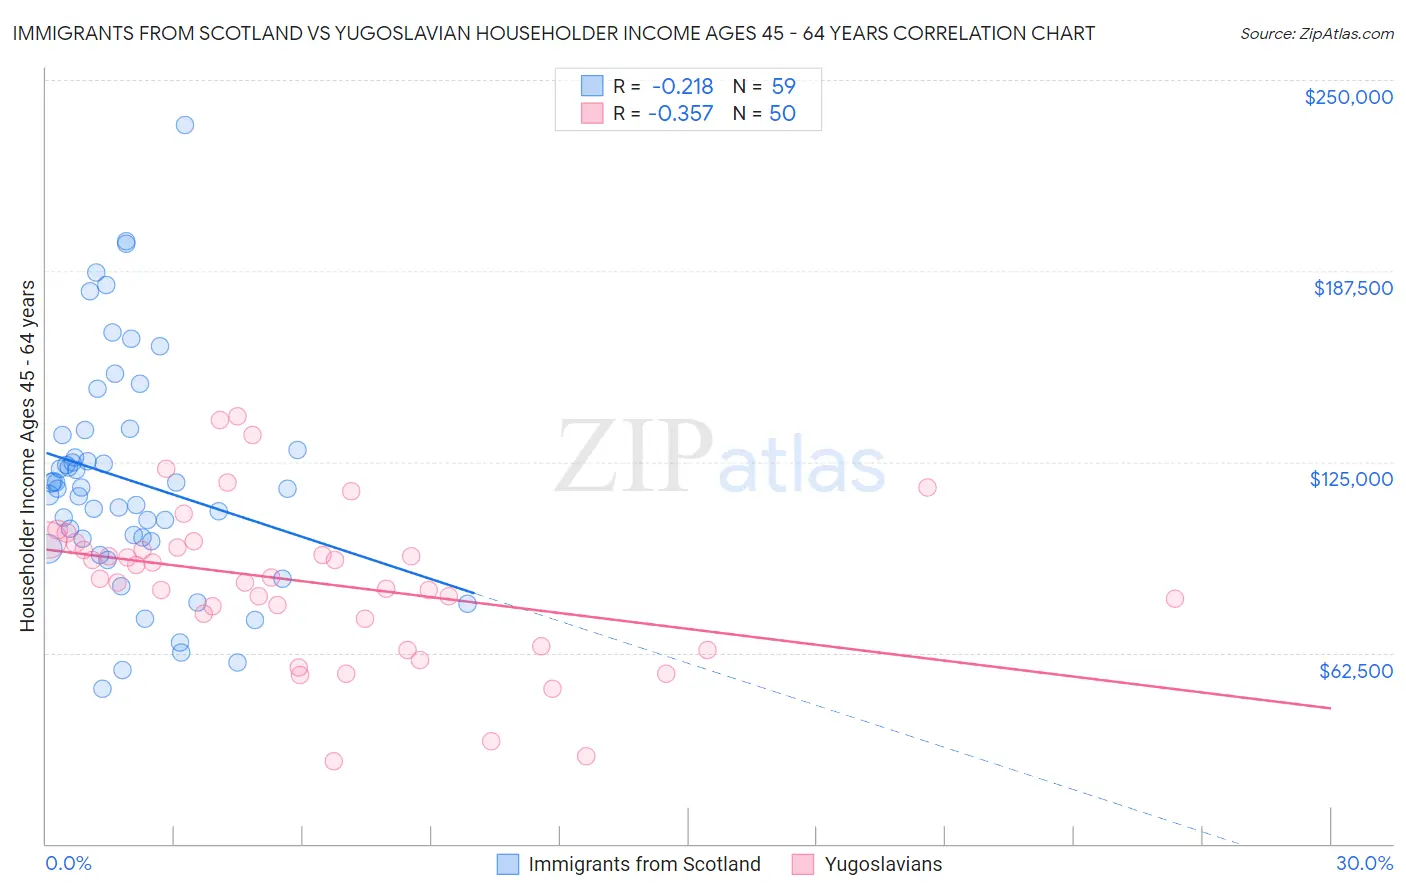 Immigrants from Scotland vs Yugoslavian Householder Income Ages 45 - 64 years